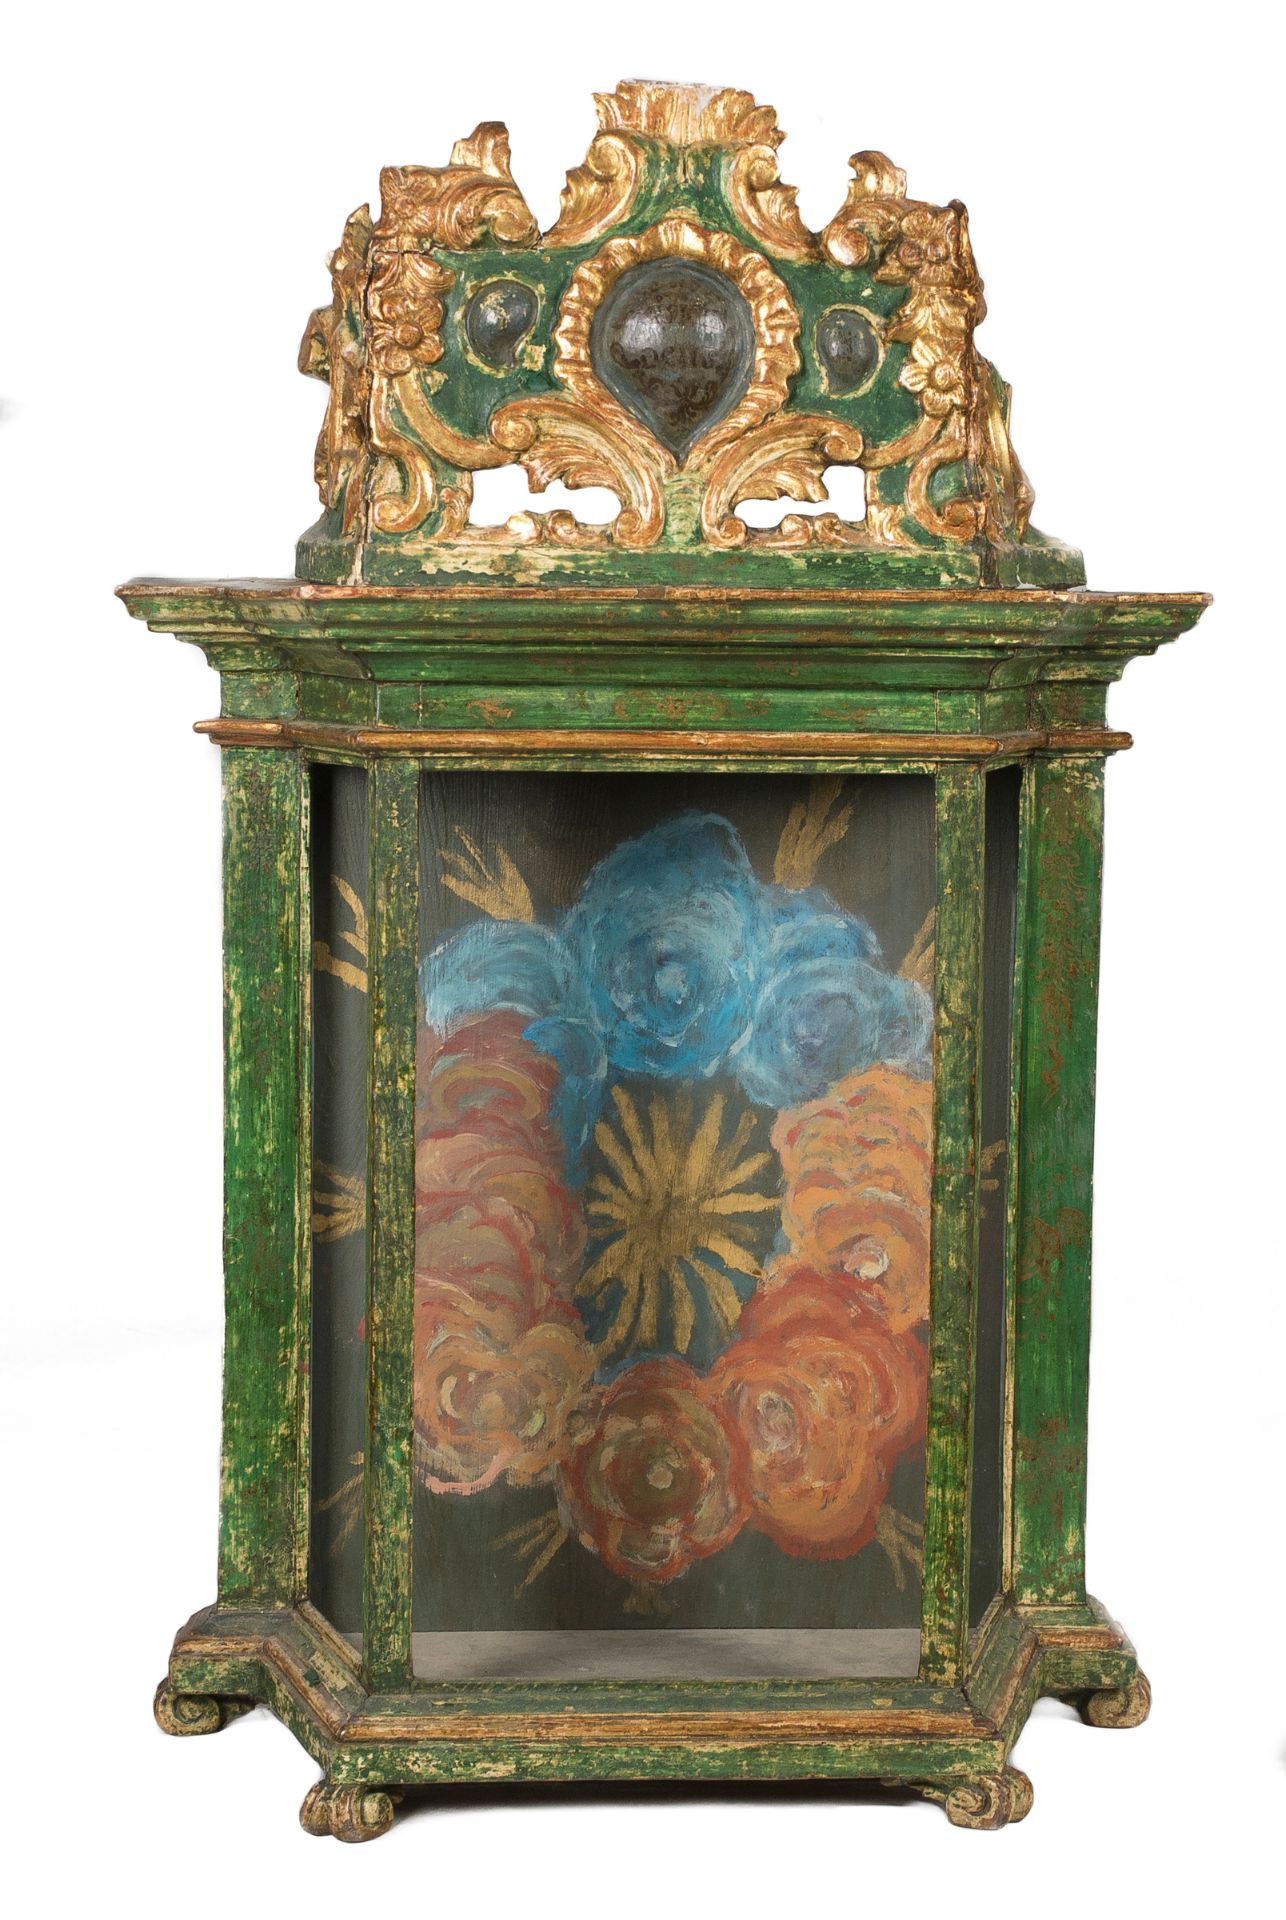 Pair of carved, polychromed and gilded wooden niches. Baroque. Late 17th century. 88 x 55 x 23 cm.